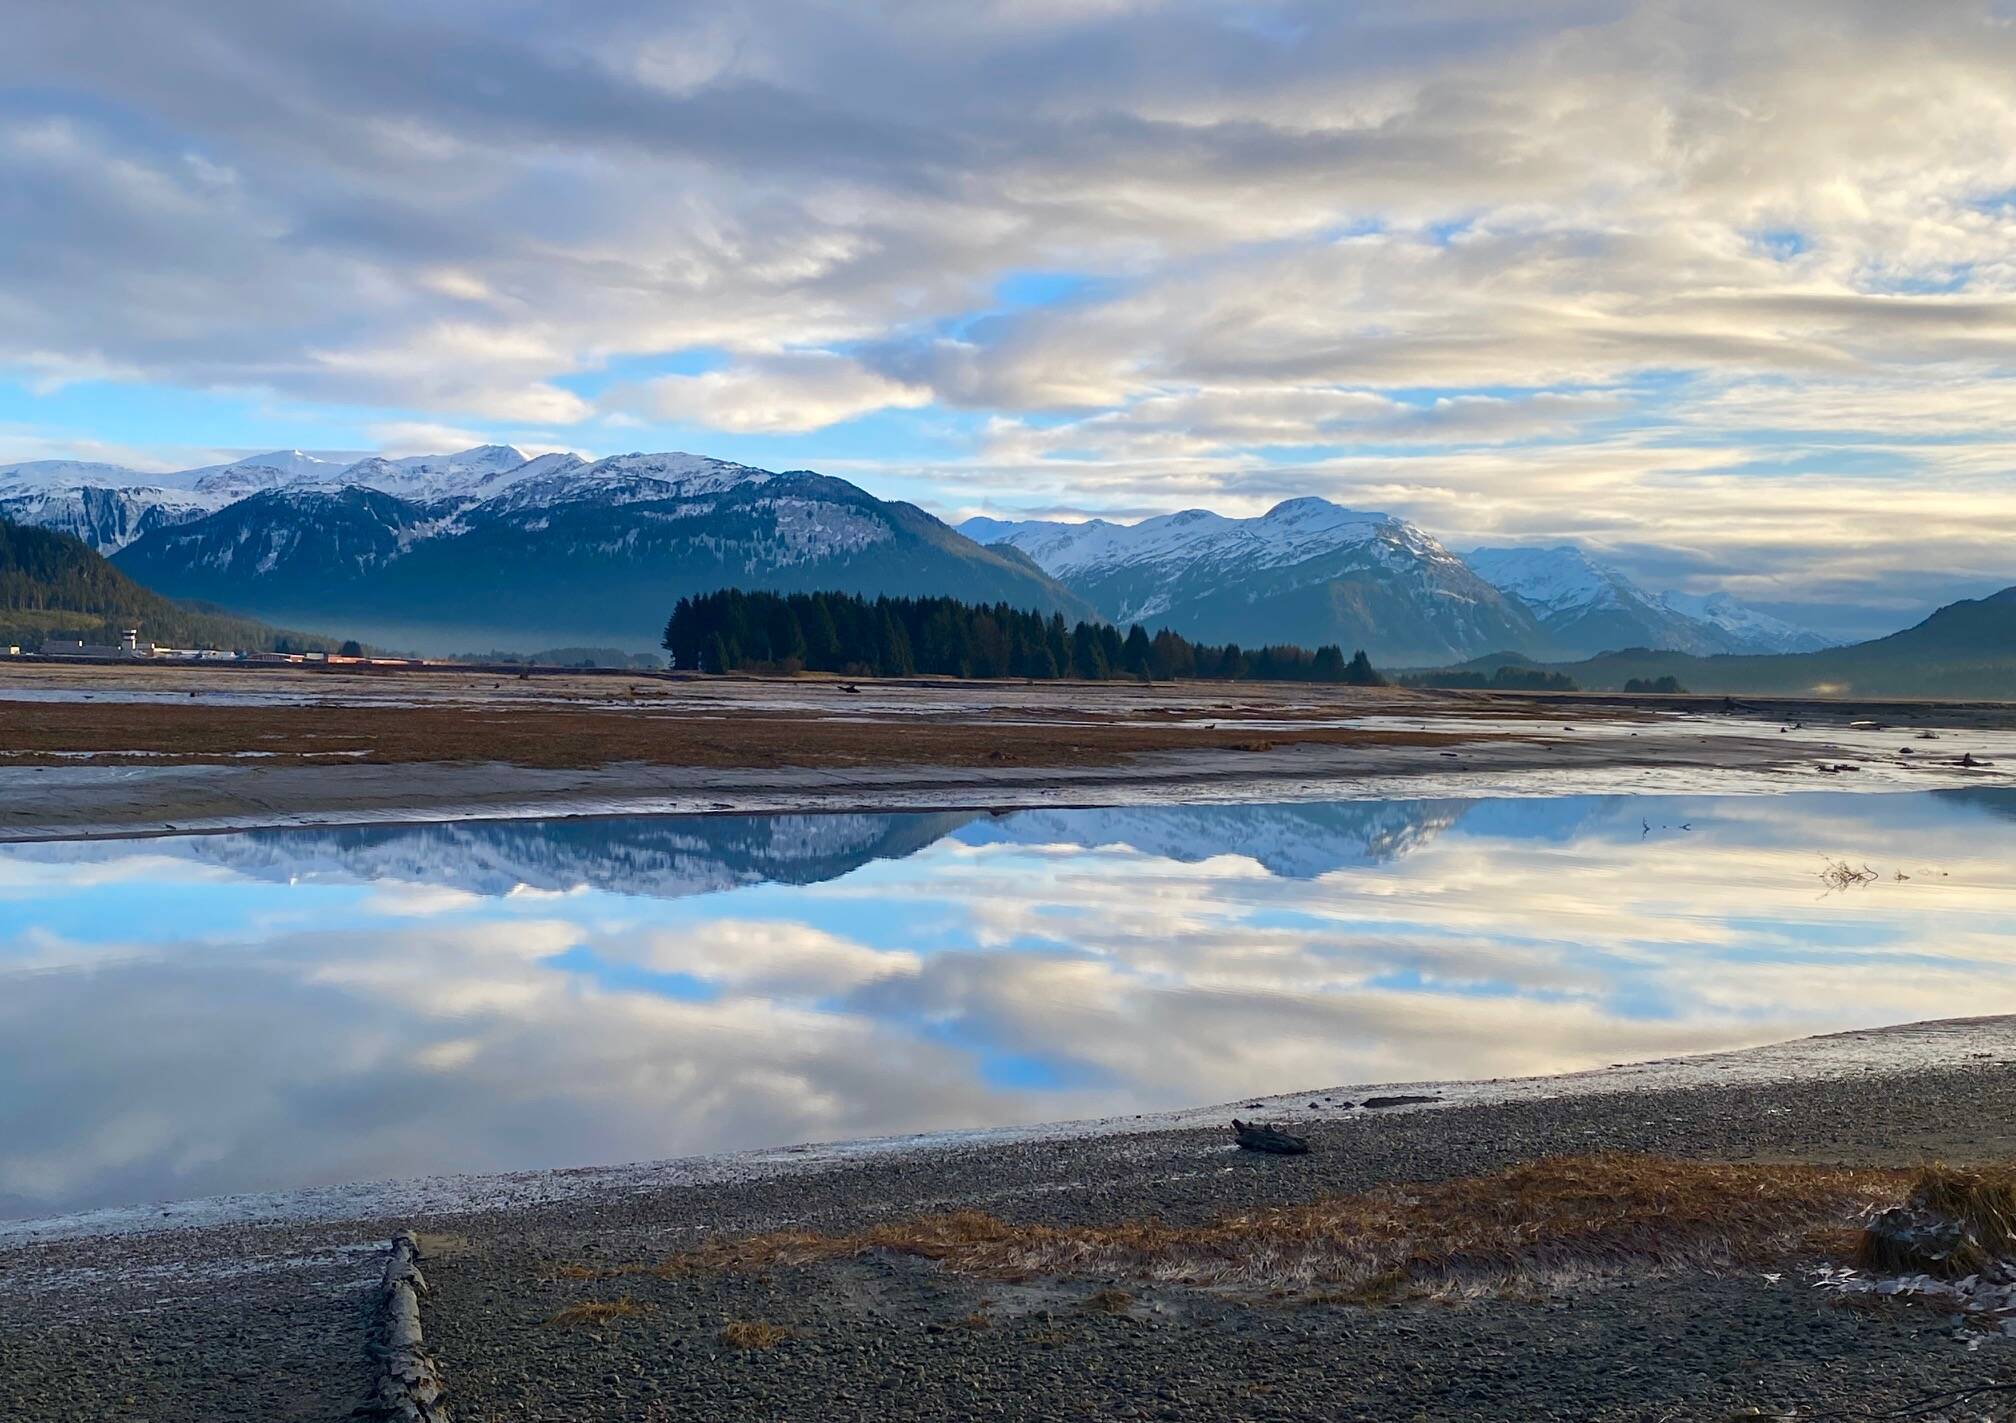 Cloud formations above Heinzelman Ridge and Mount Juneau reflect near the mouth of the Mendenhall River on Dec. 2. (Photo by Denise Carroll)